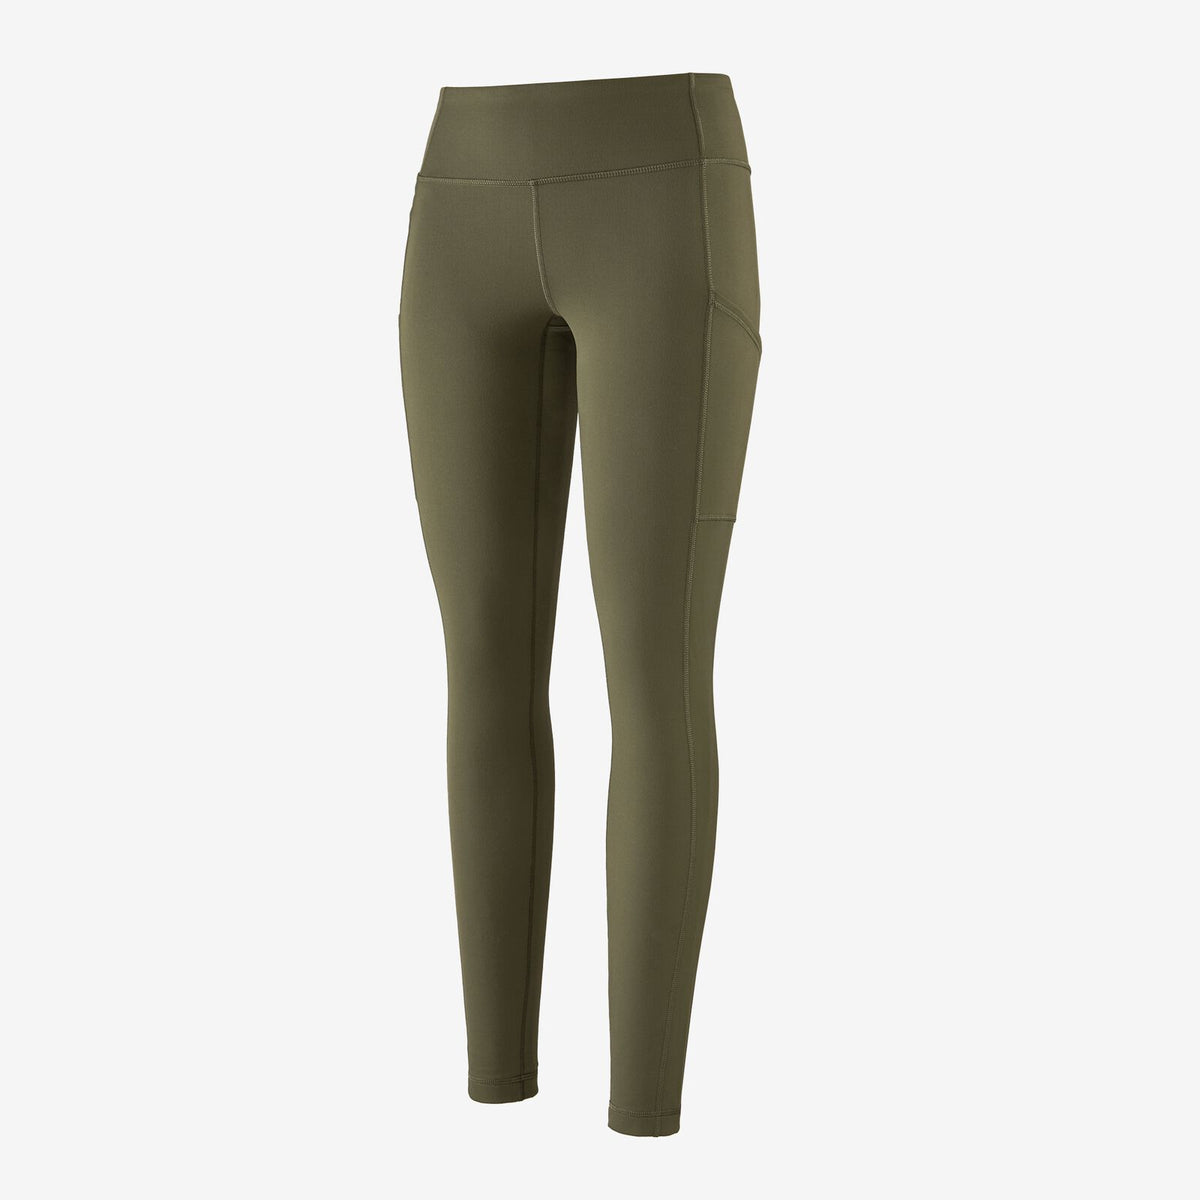 Patagonia - Women's Pack Out Joggers